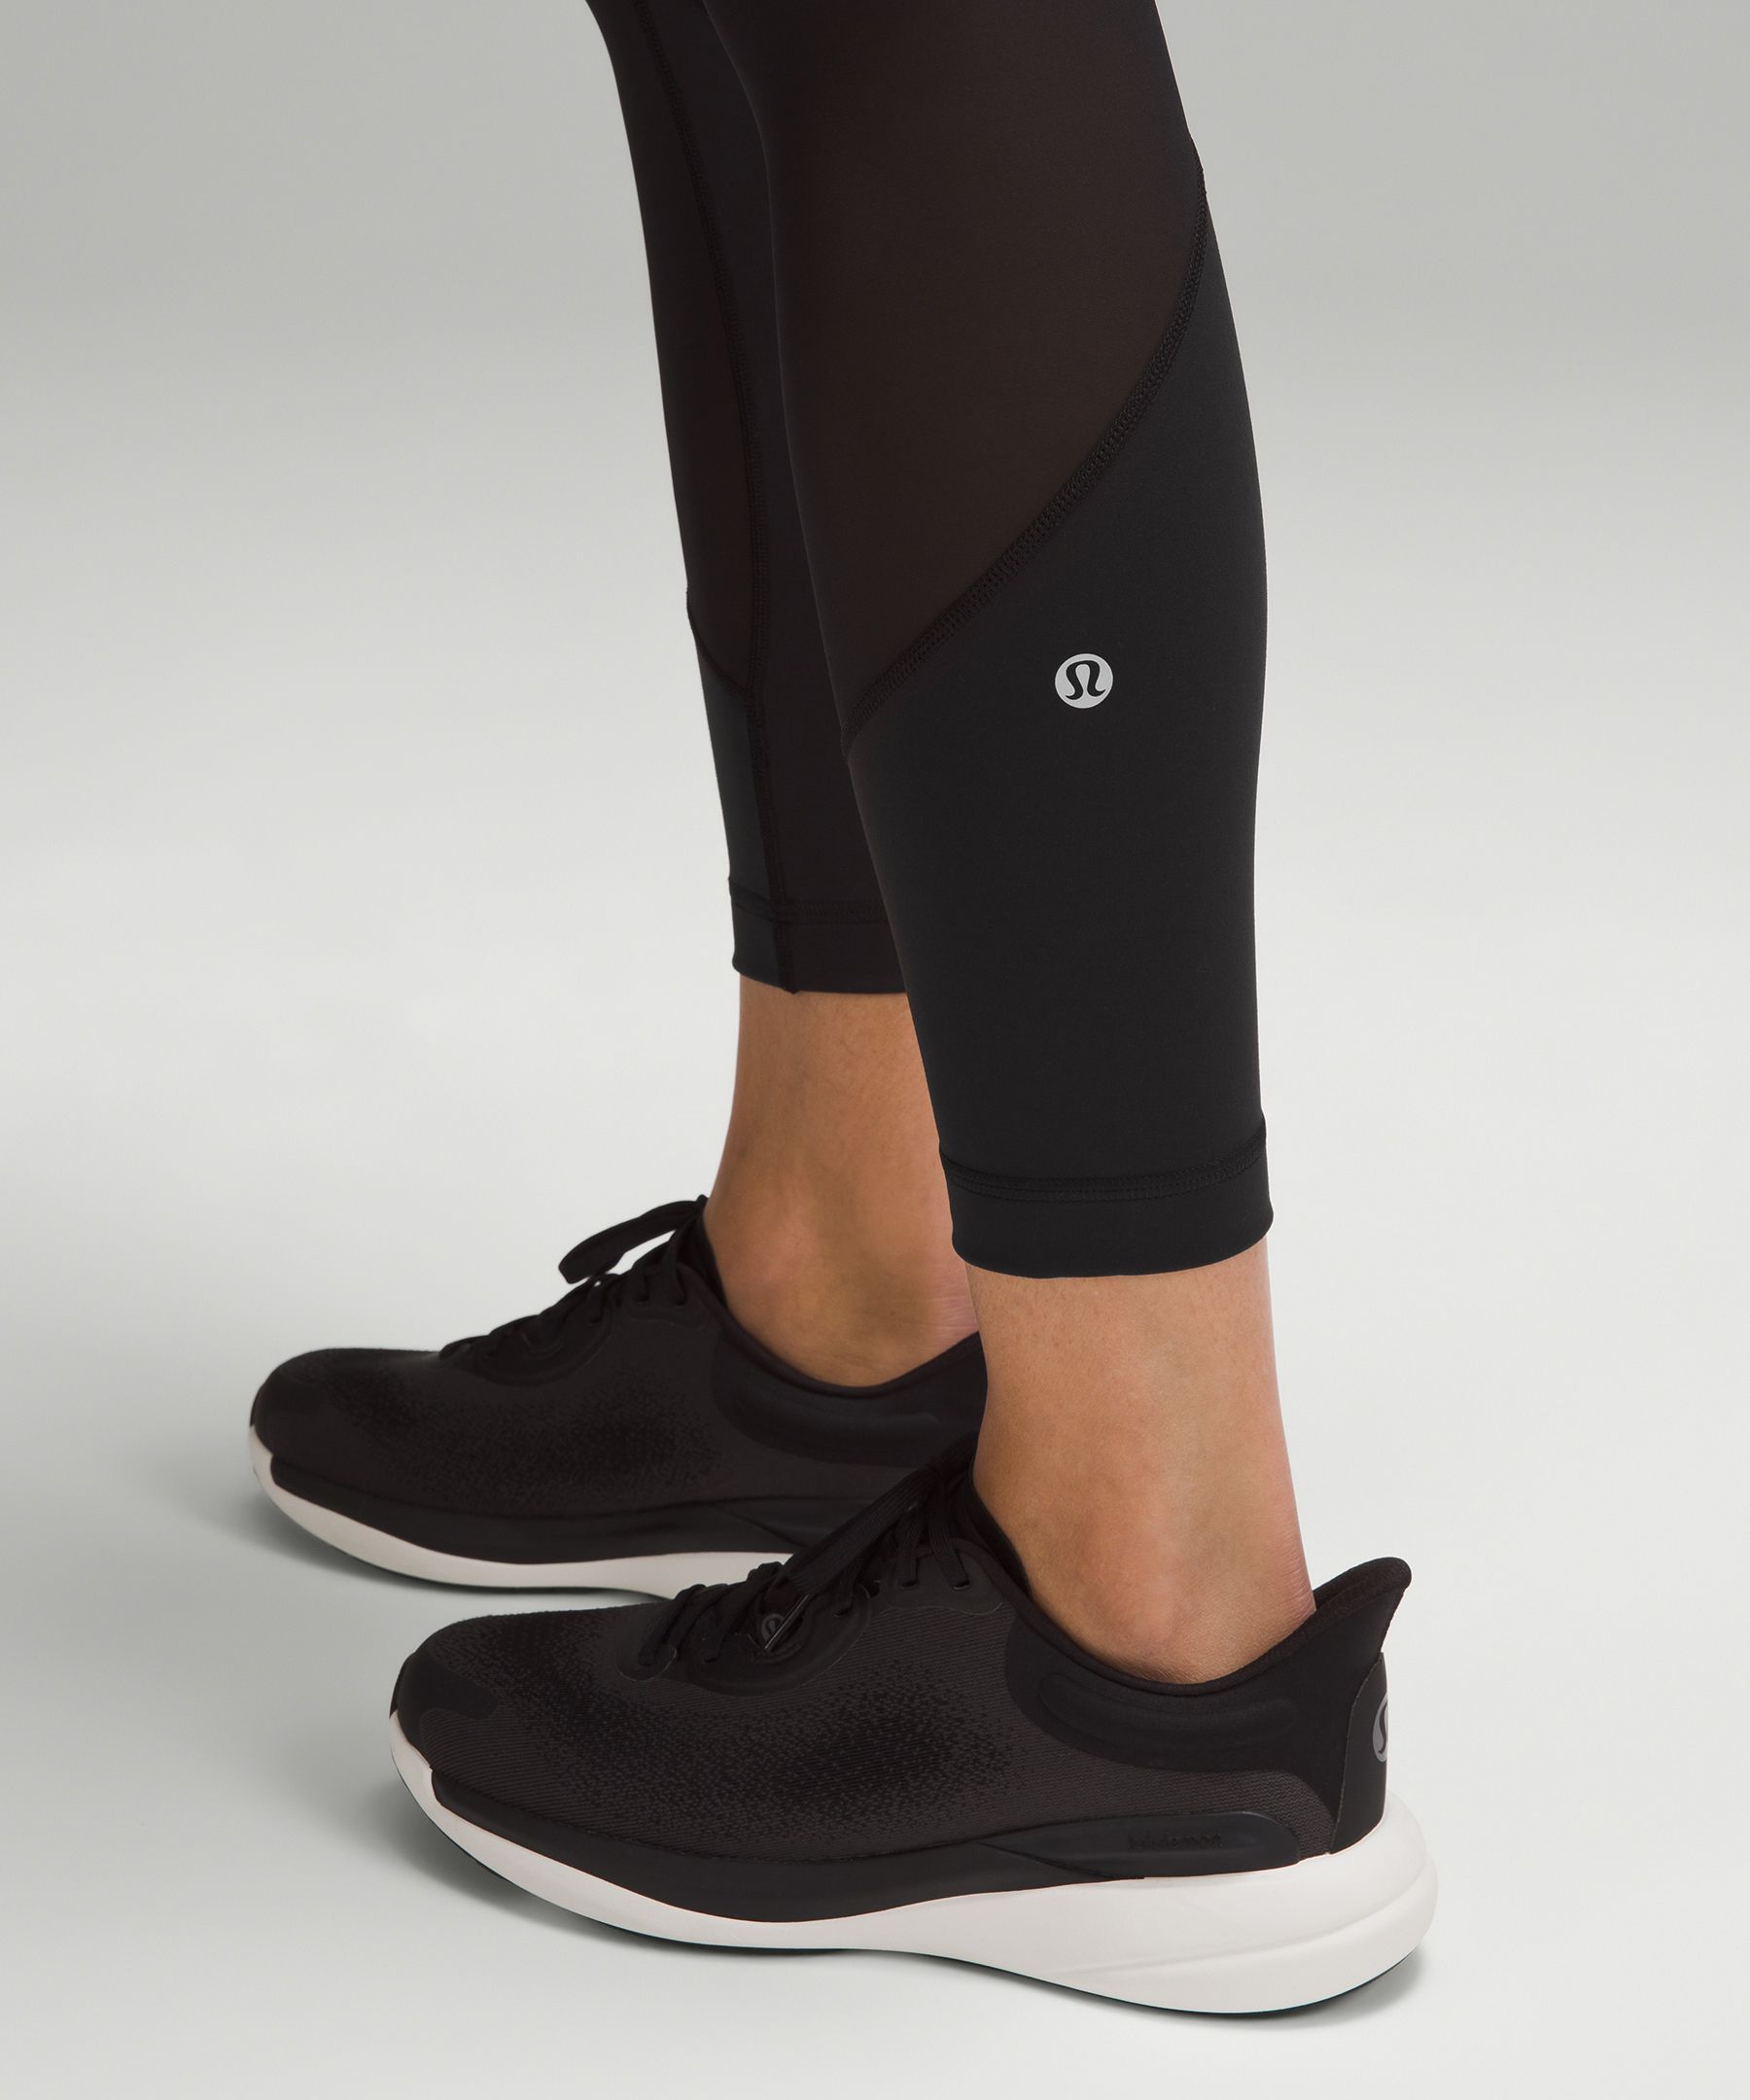 Lululemon Athletica Wunder Train Hi-Rise Tight 25'' (BLK, 8), Blk, 8 :  : Clothing, Shoes & Accessories